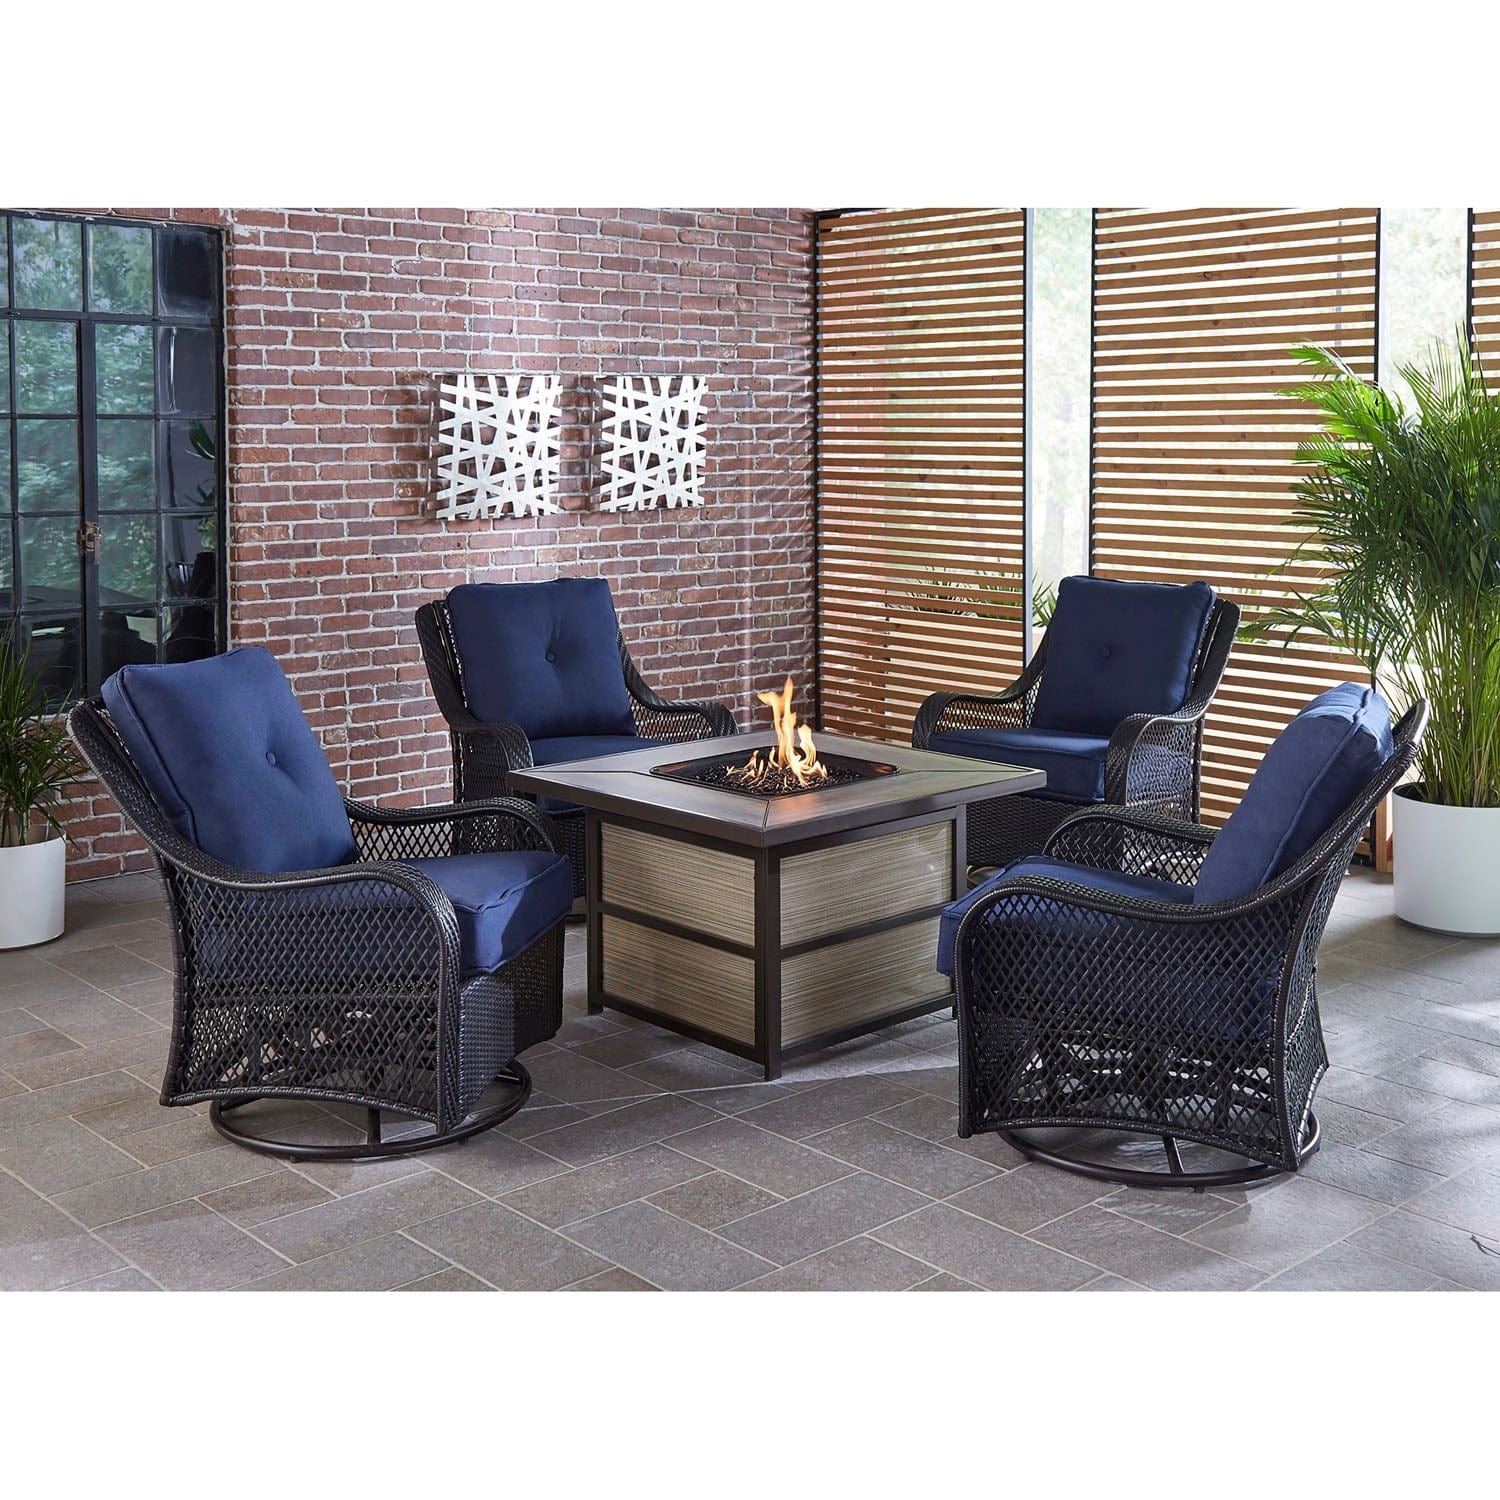 Hanover Fire Pit Chat Set Hanover Orleans 5-Piece Fire Pit Chat Set with a 40,000 BTU Fire Pit Table and 4 Woven Swivel Gliders in Navy Blue | ORL5PCSW4SQFP-NVY